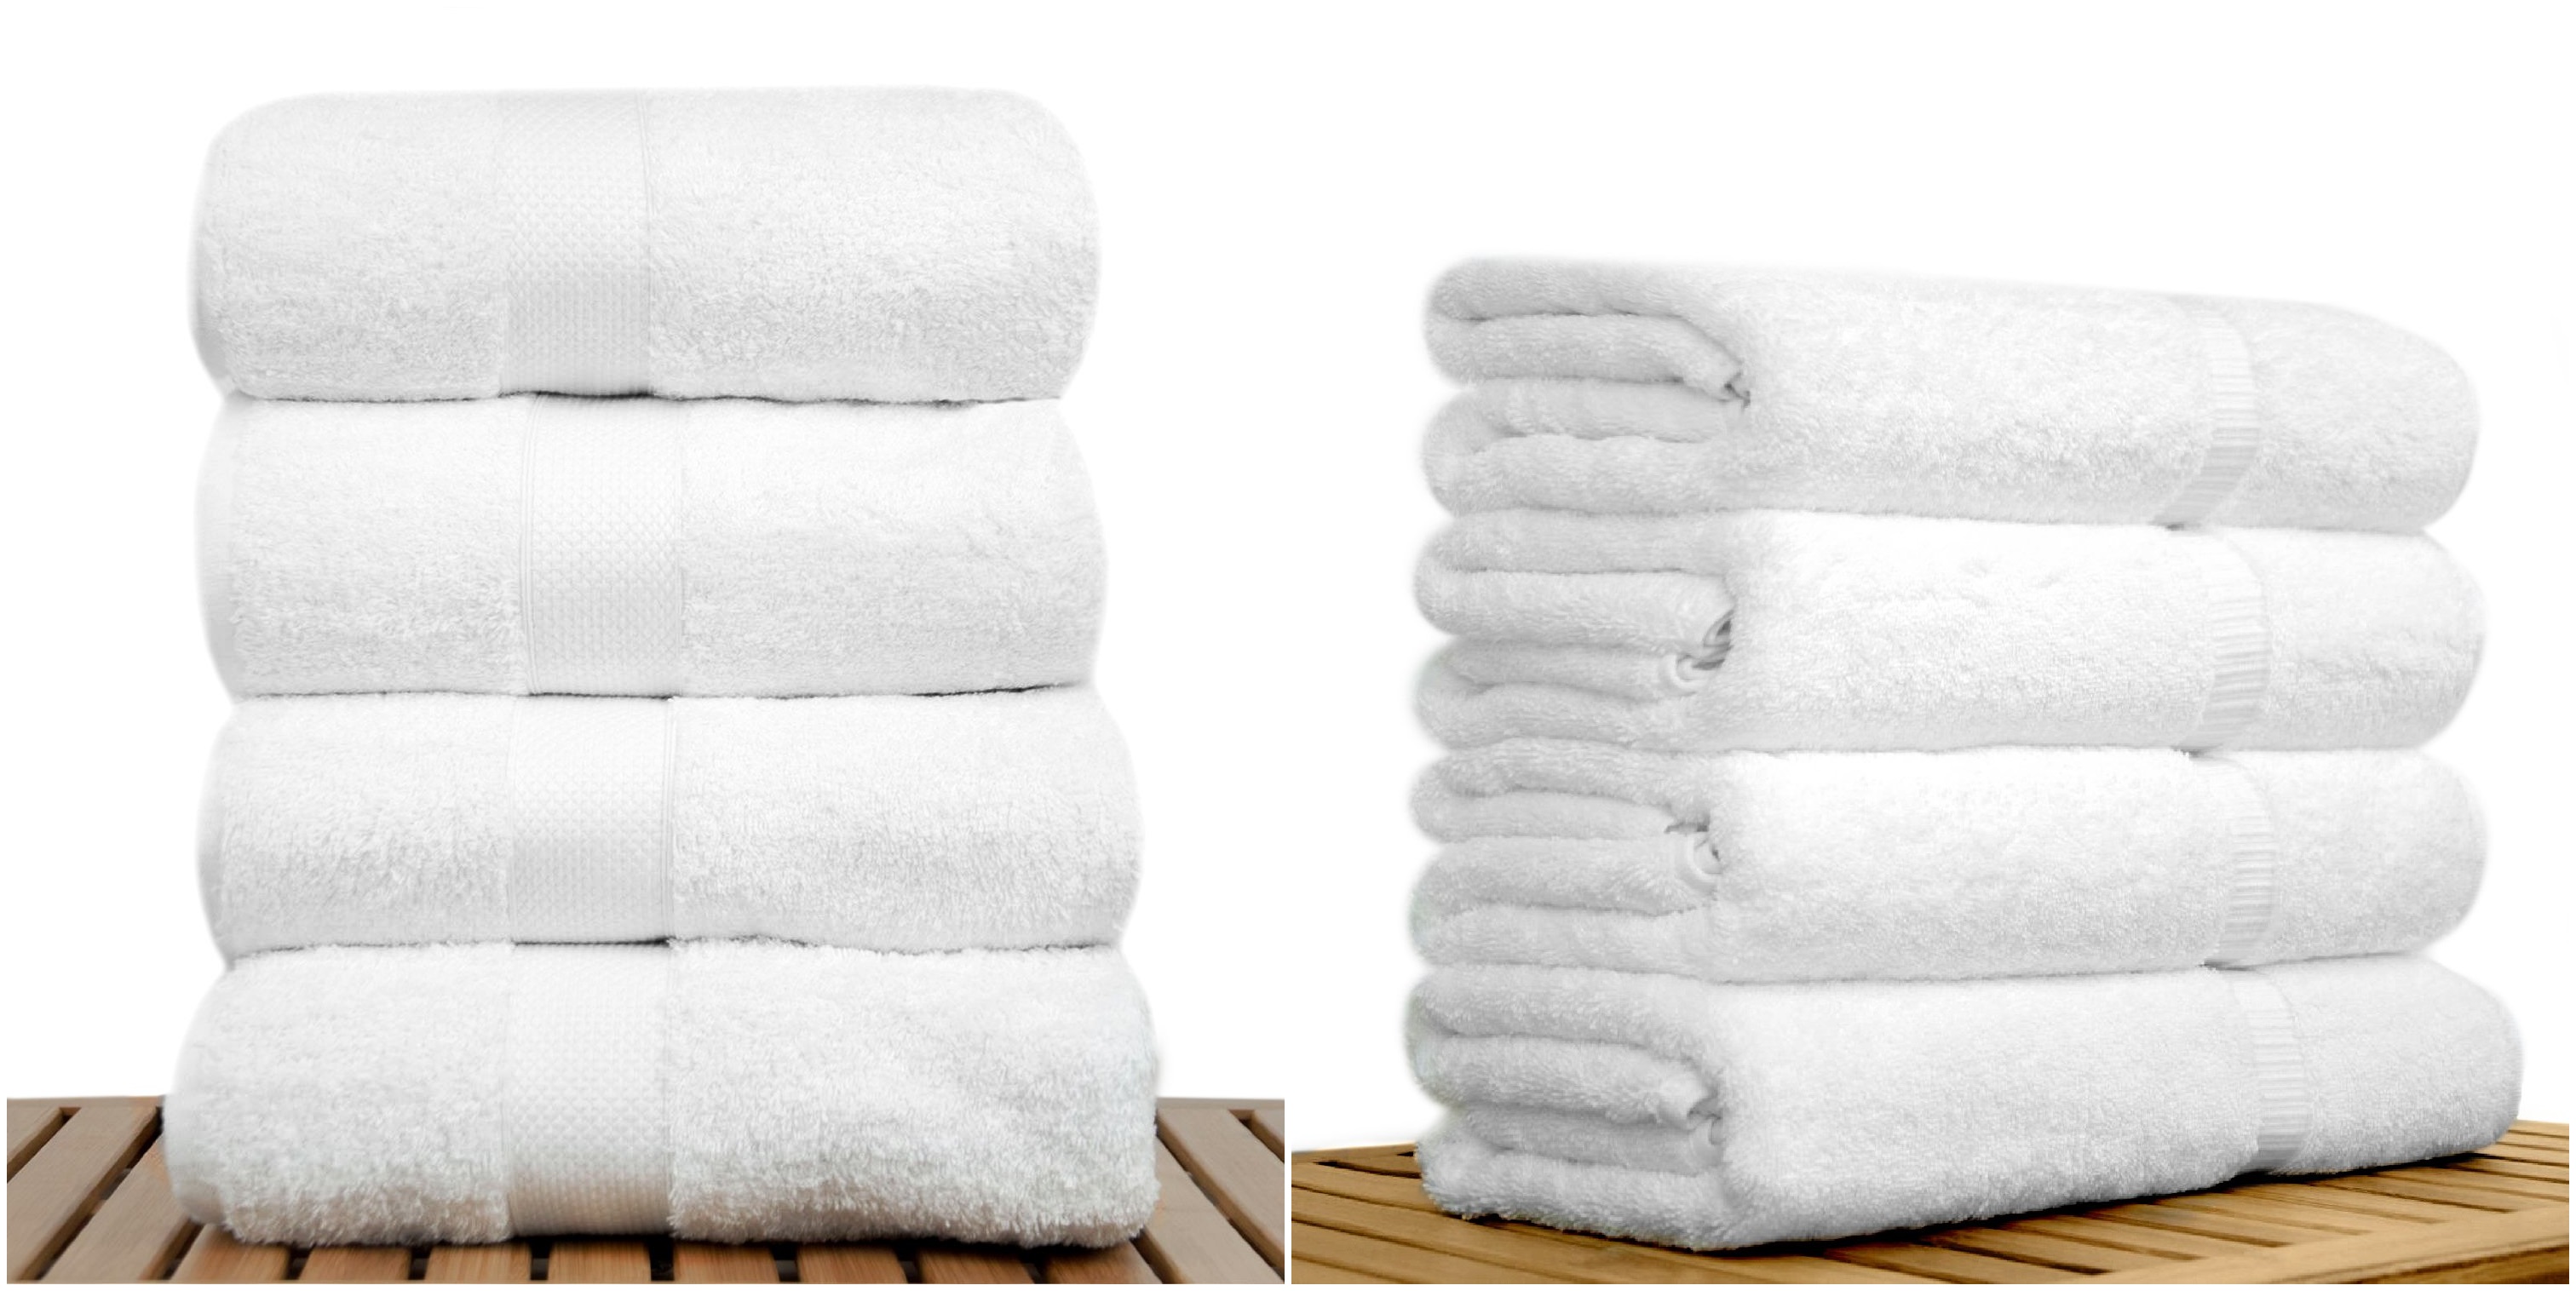 turkish cotton bamboo blended ultra soft white bath towel | 13 Ways To Make Your Guest Room Welcoming And Comfy | guest room | bath towel